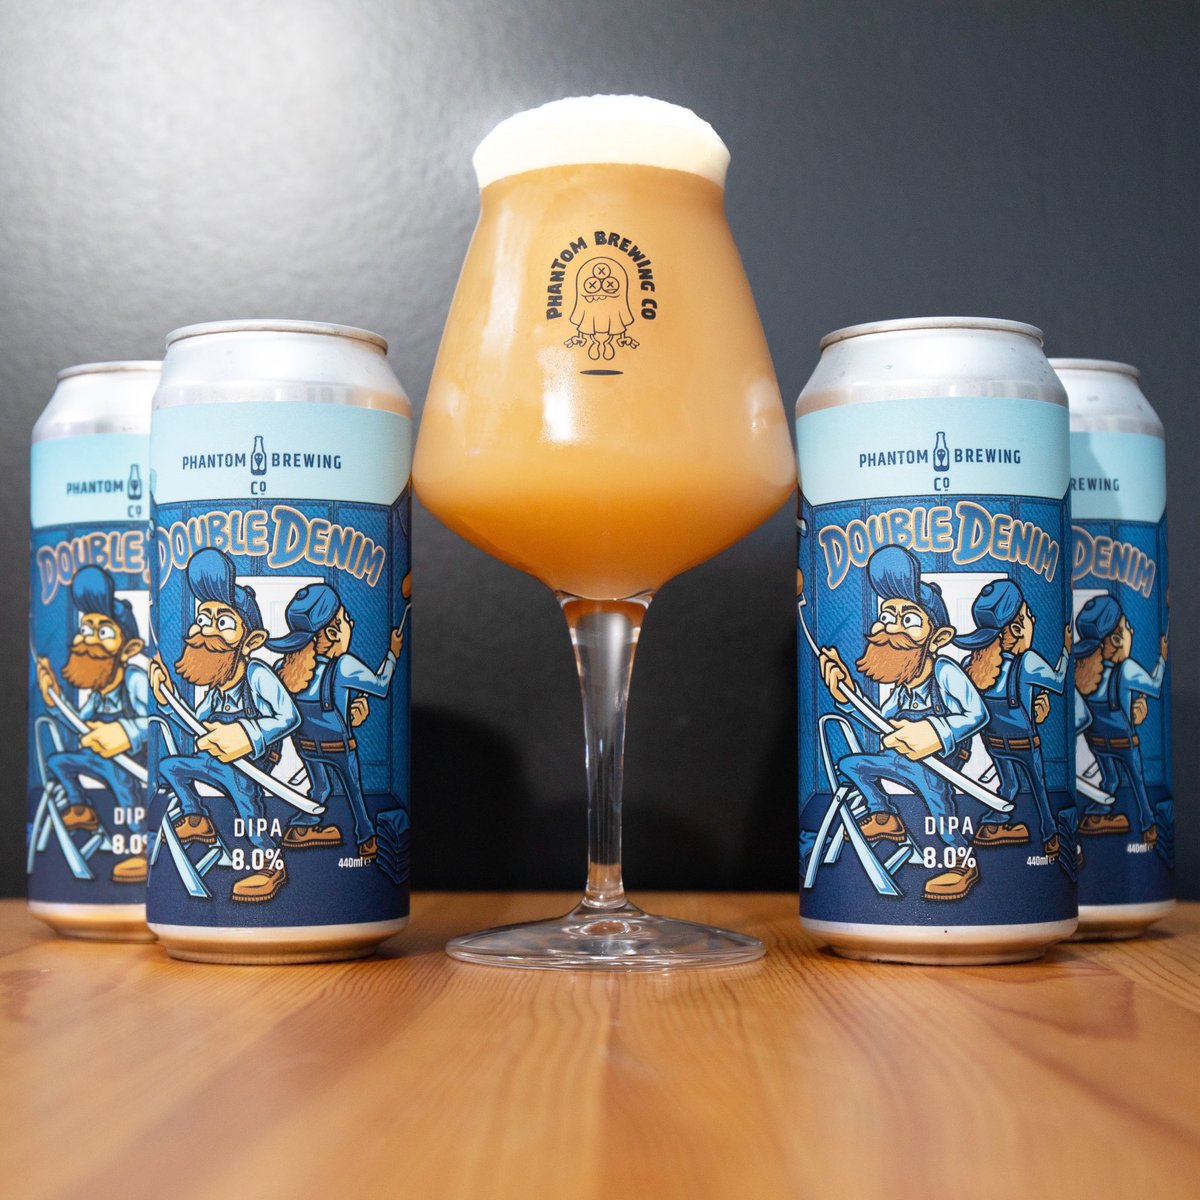 👖👖DOUBLE DENIM👖👖 Think Denim, but doubled. Extra punchy notes of fleshy apricot and overripe mango balanced with citrusy lime. Thursday 17:00-20:30 Friday 15:00-22:30 Saturday 13:00-22:30 Sunday 13:00-18:00